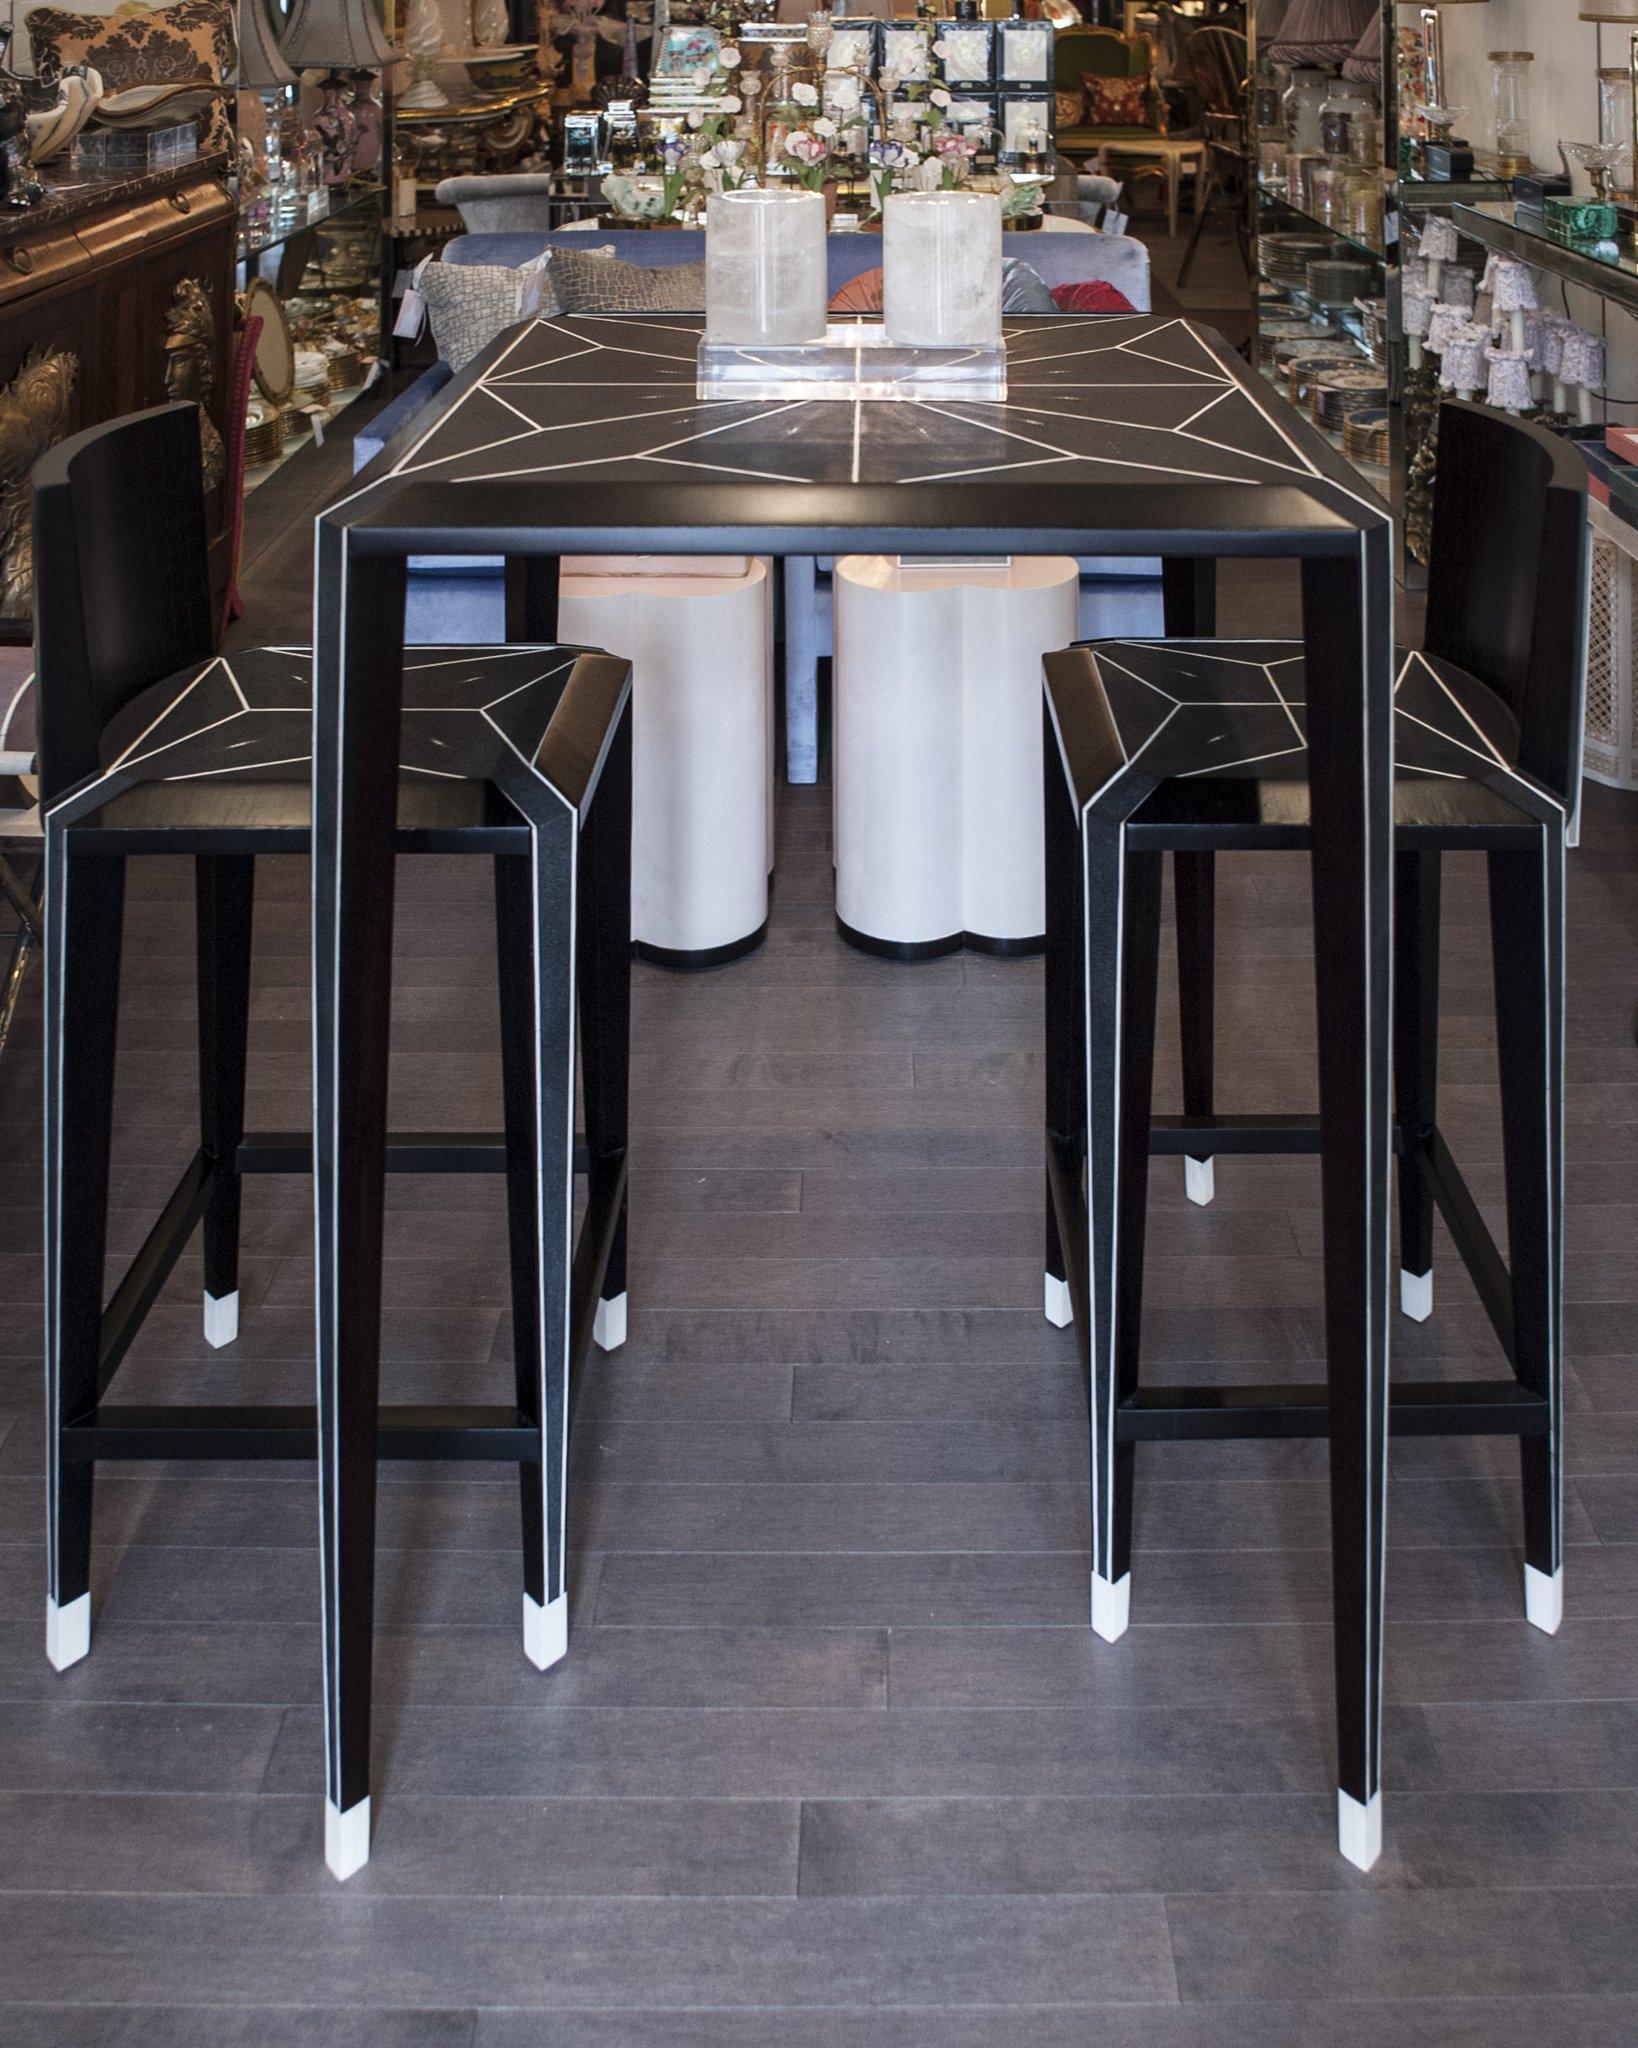 Enjoy sipping on your favourite cocktail while seated at this Contemporary Authentic Shagreen bar table and bar chairs. The monochromatic palette and sleek modern lines exude sophistication, while the bone inlay details add refinement.